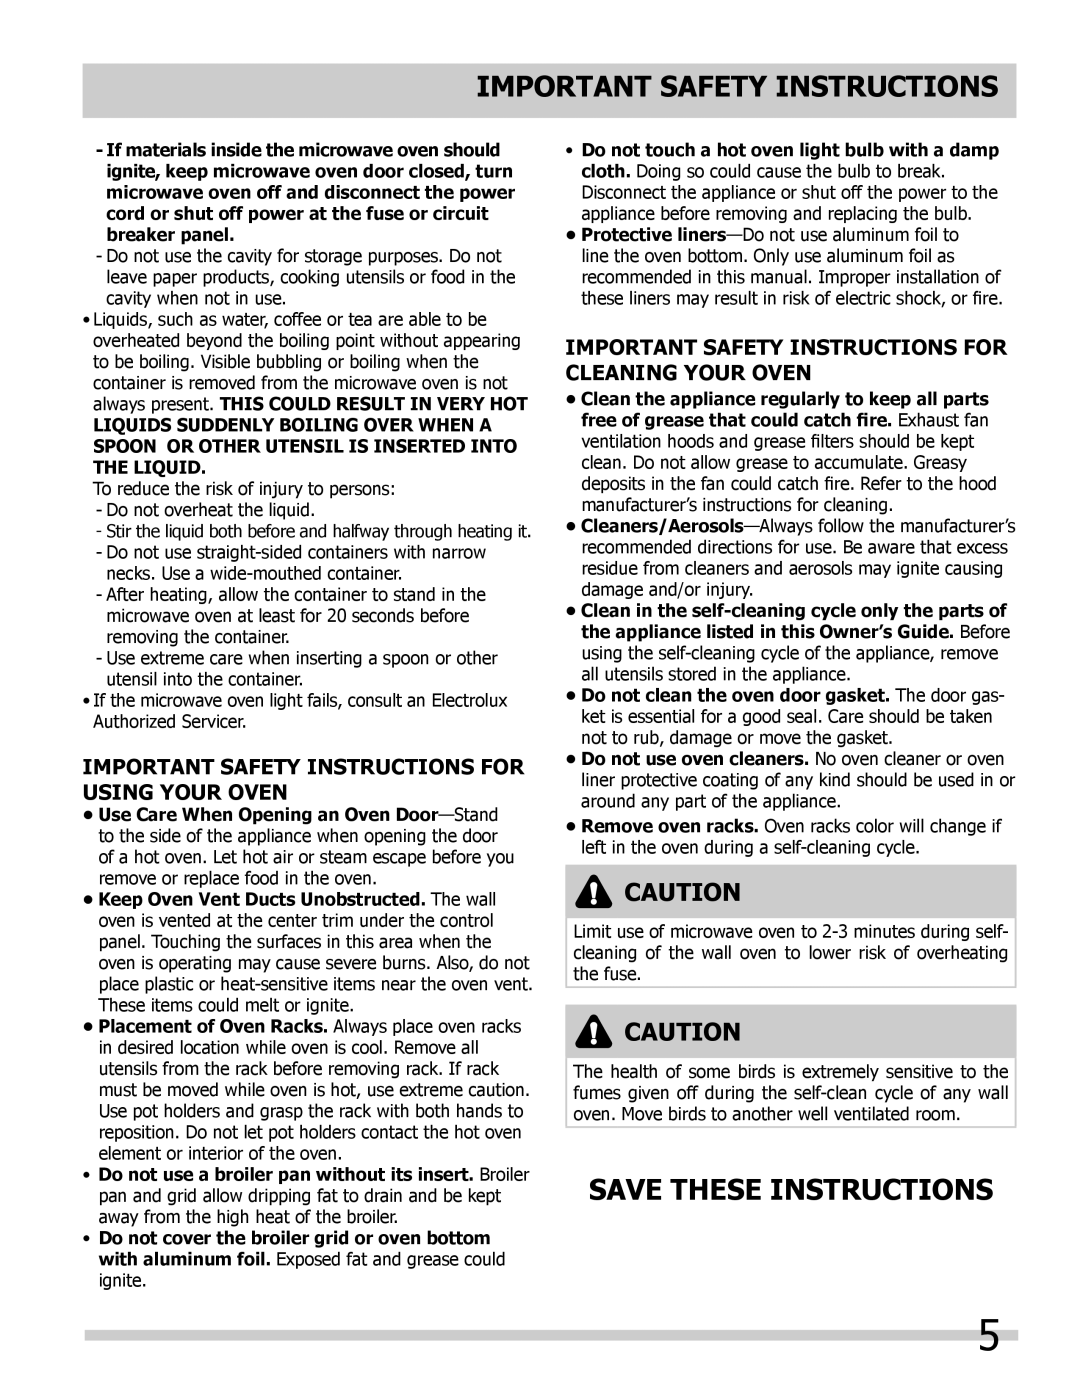 Frigidaire 318205300 Save these instructions, Important Safety Instructions For Using Your Oven 